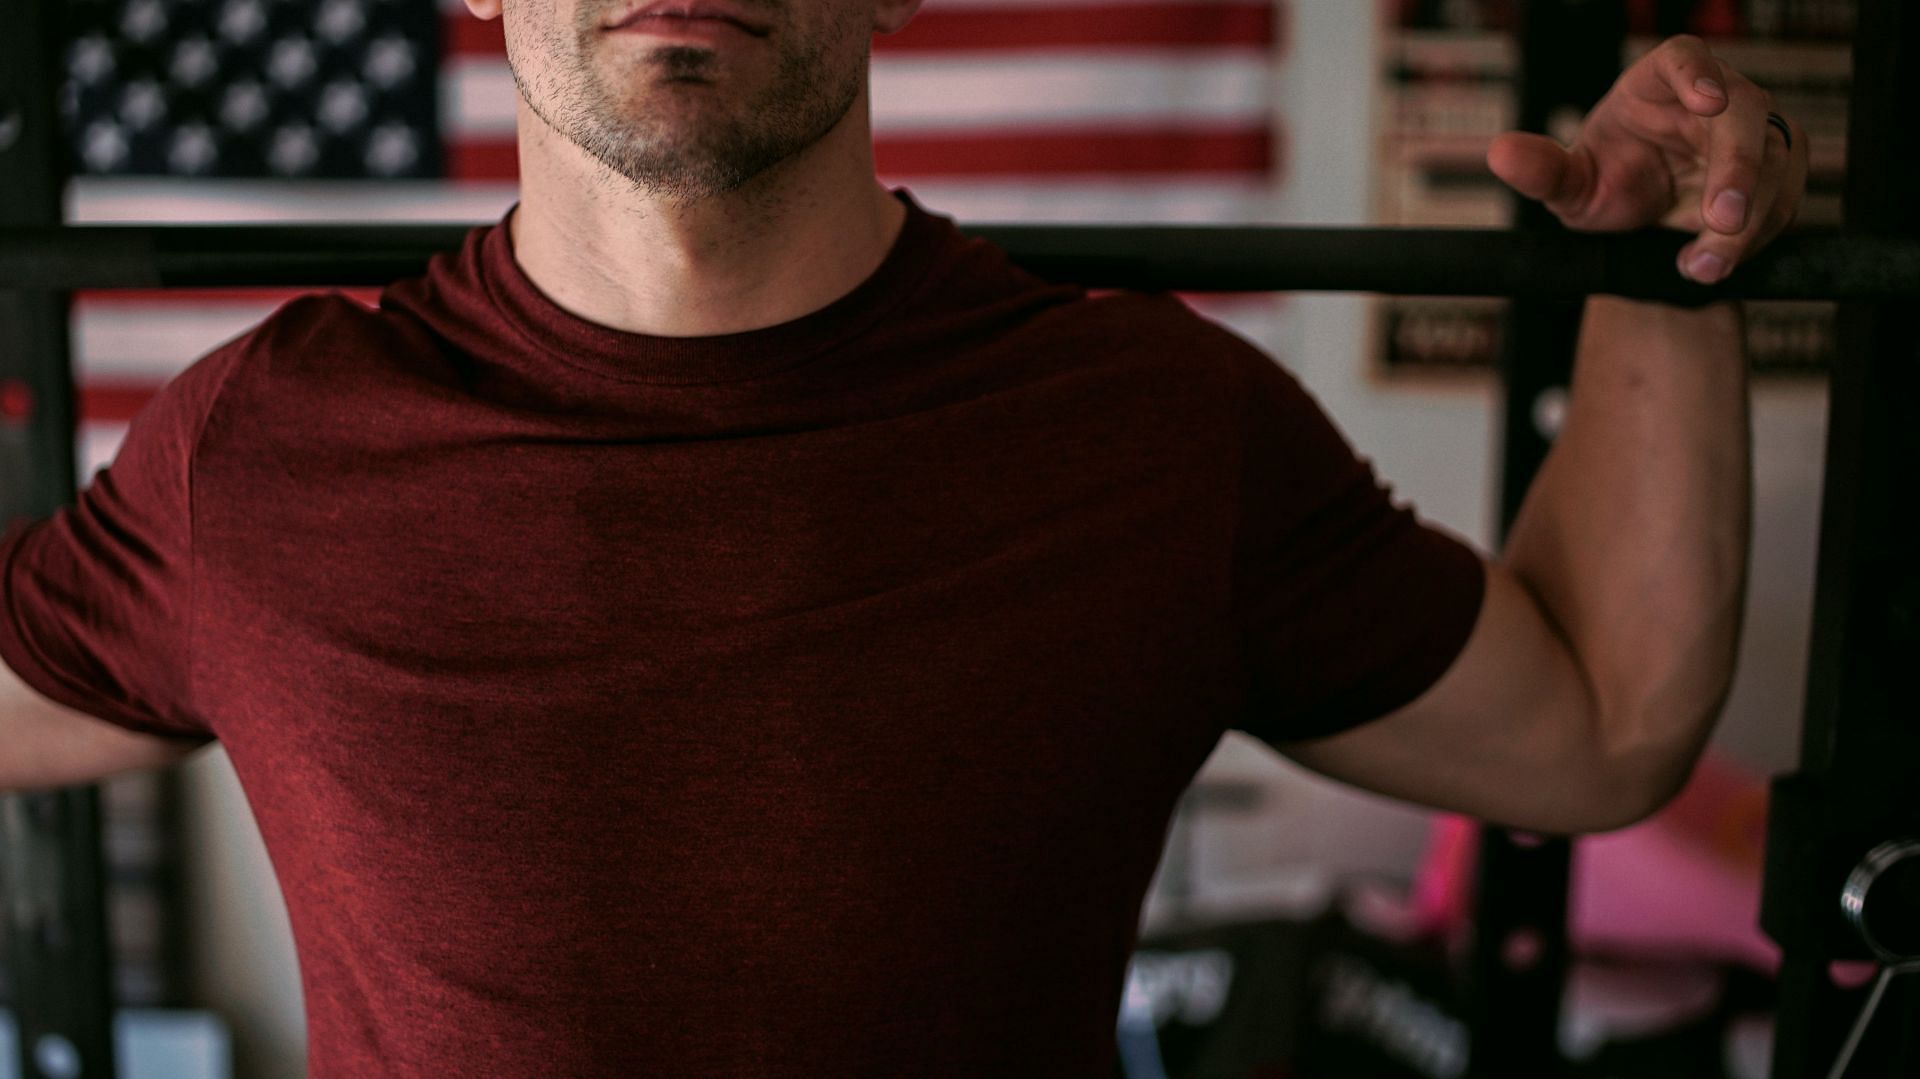 Shoulder Shrugs are simple and effective exercises for the body. (Image via Unsplash/ Brad Neathery)